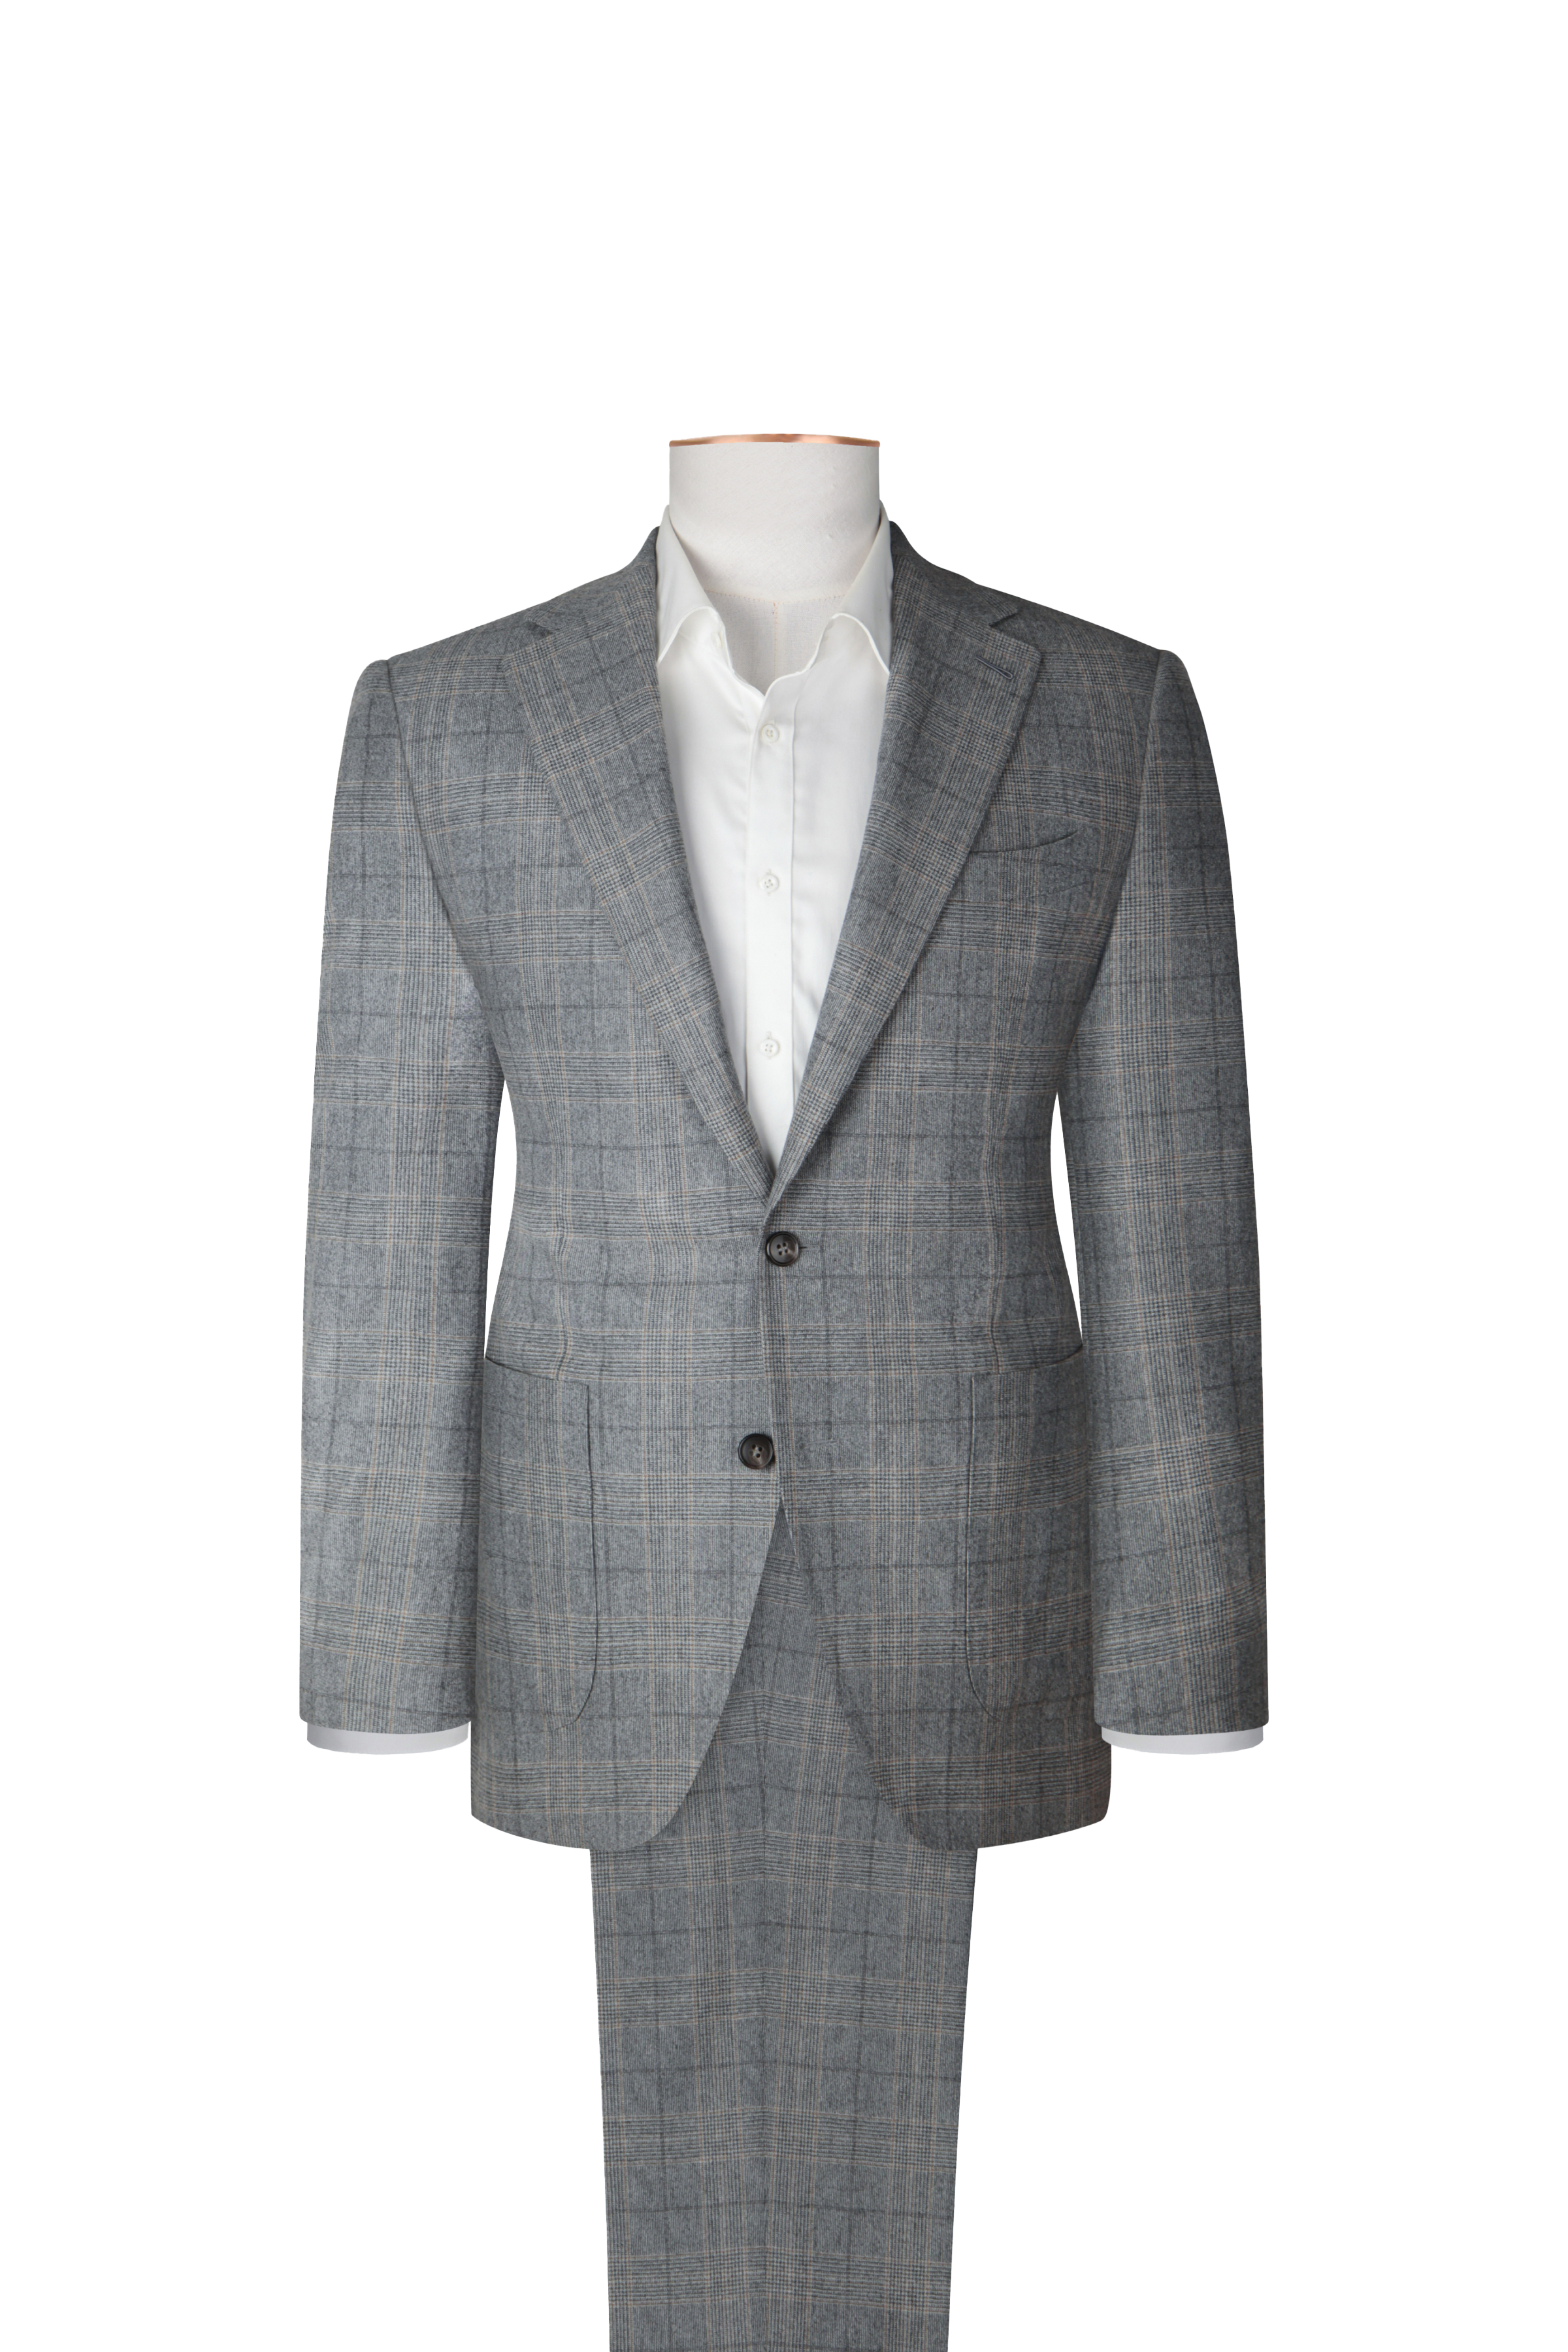 Loro Piana Grey & Neutral Plaid Suit by Knot Standard